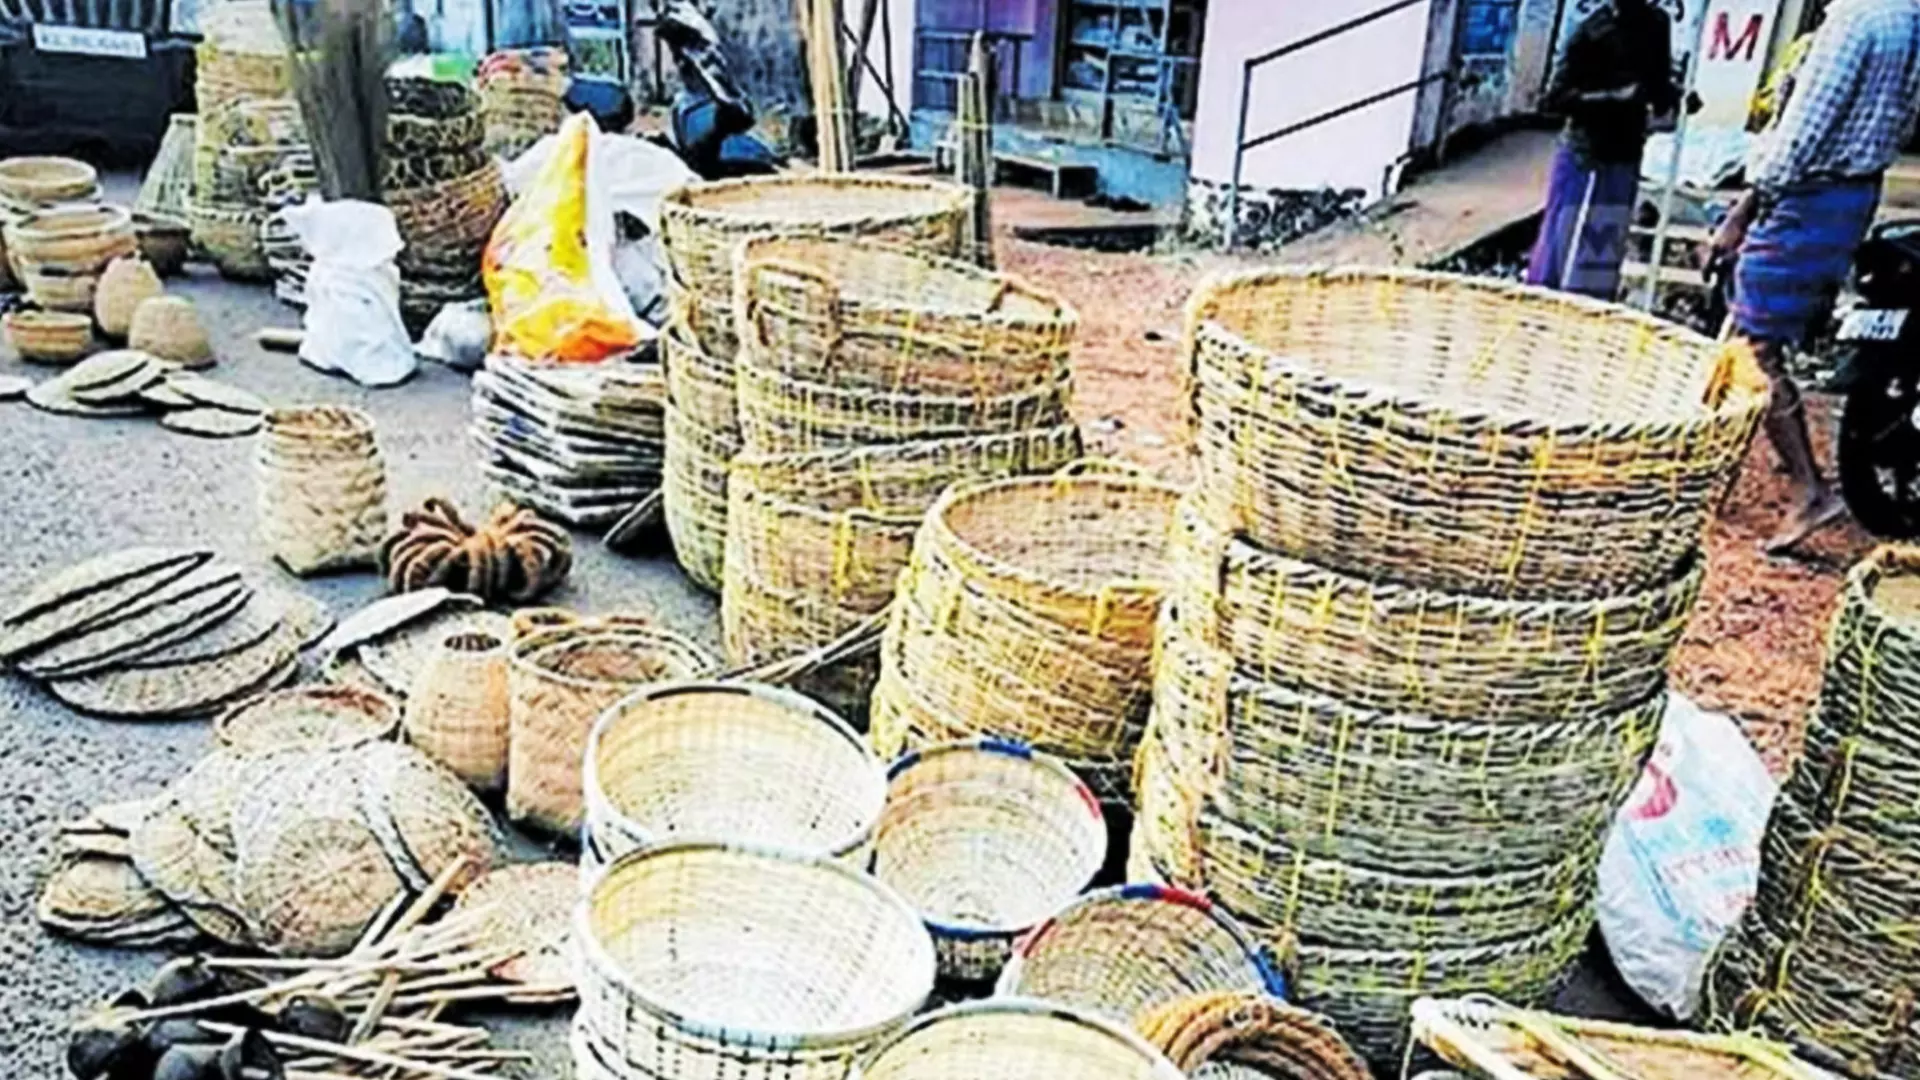 Baskets and other bamboo articles being sold in market.